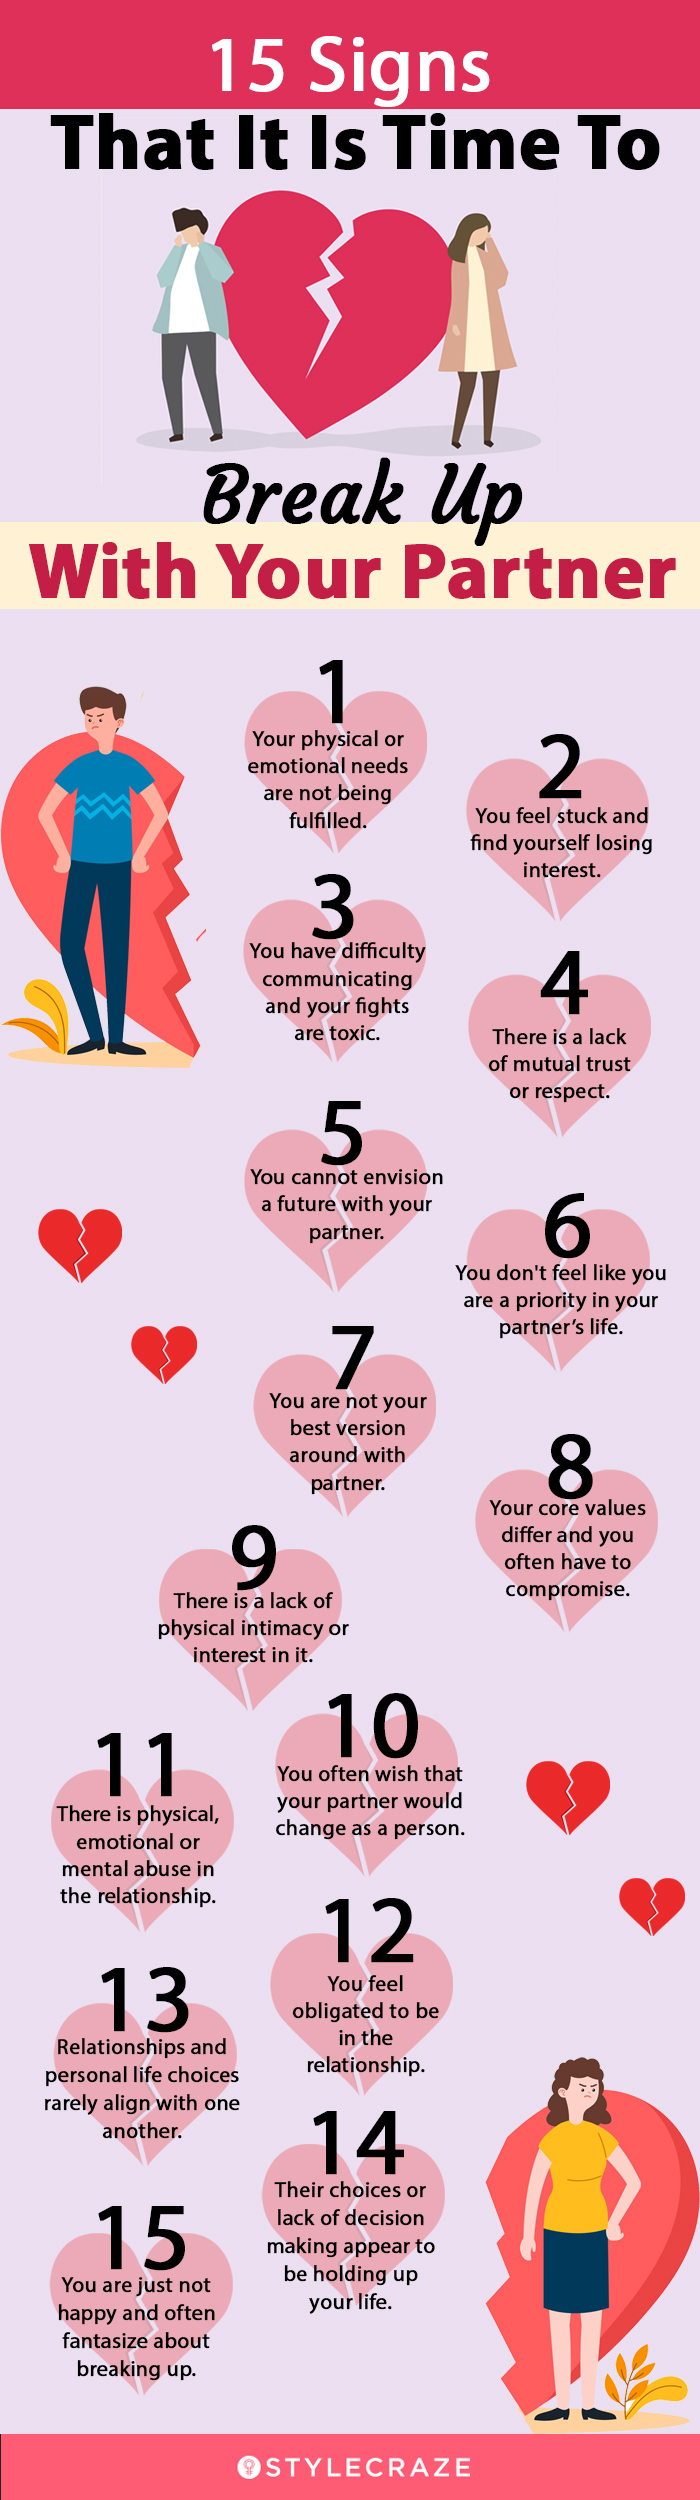 15 signs that it is time to break up with your partner (infographic)